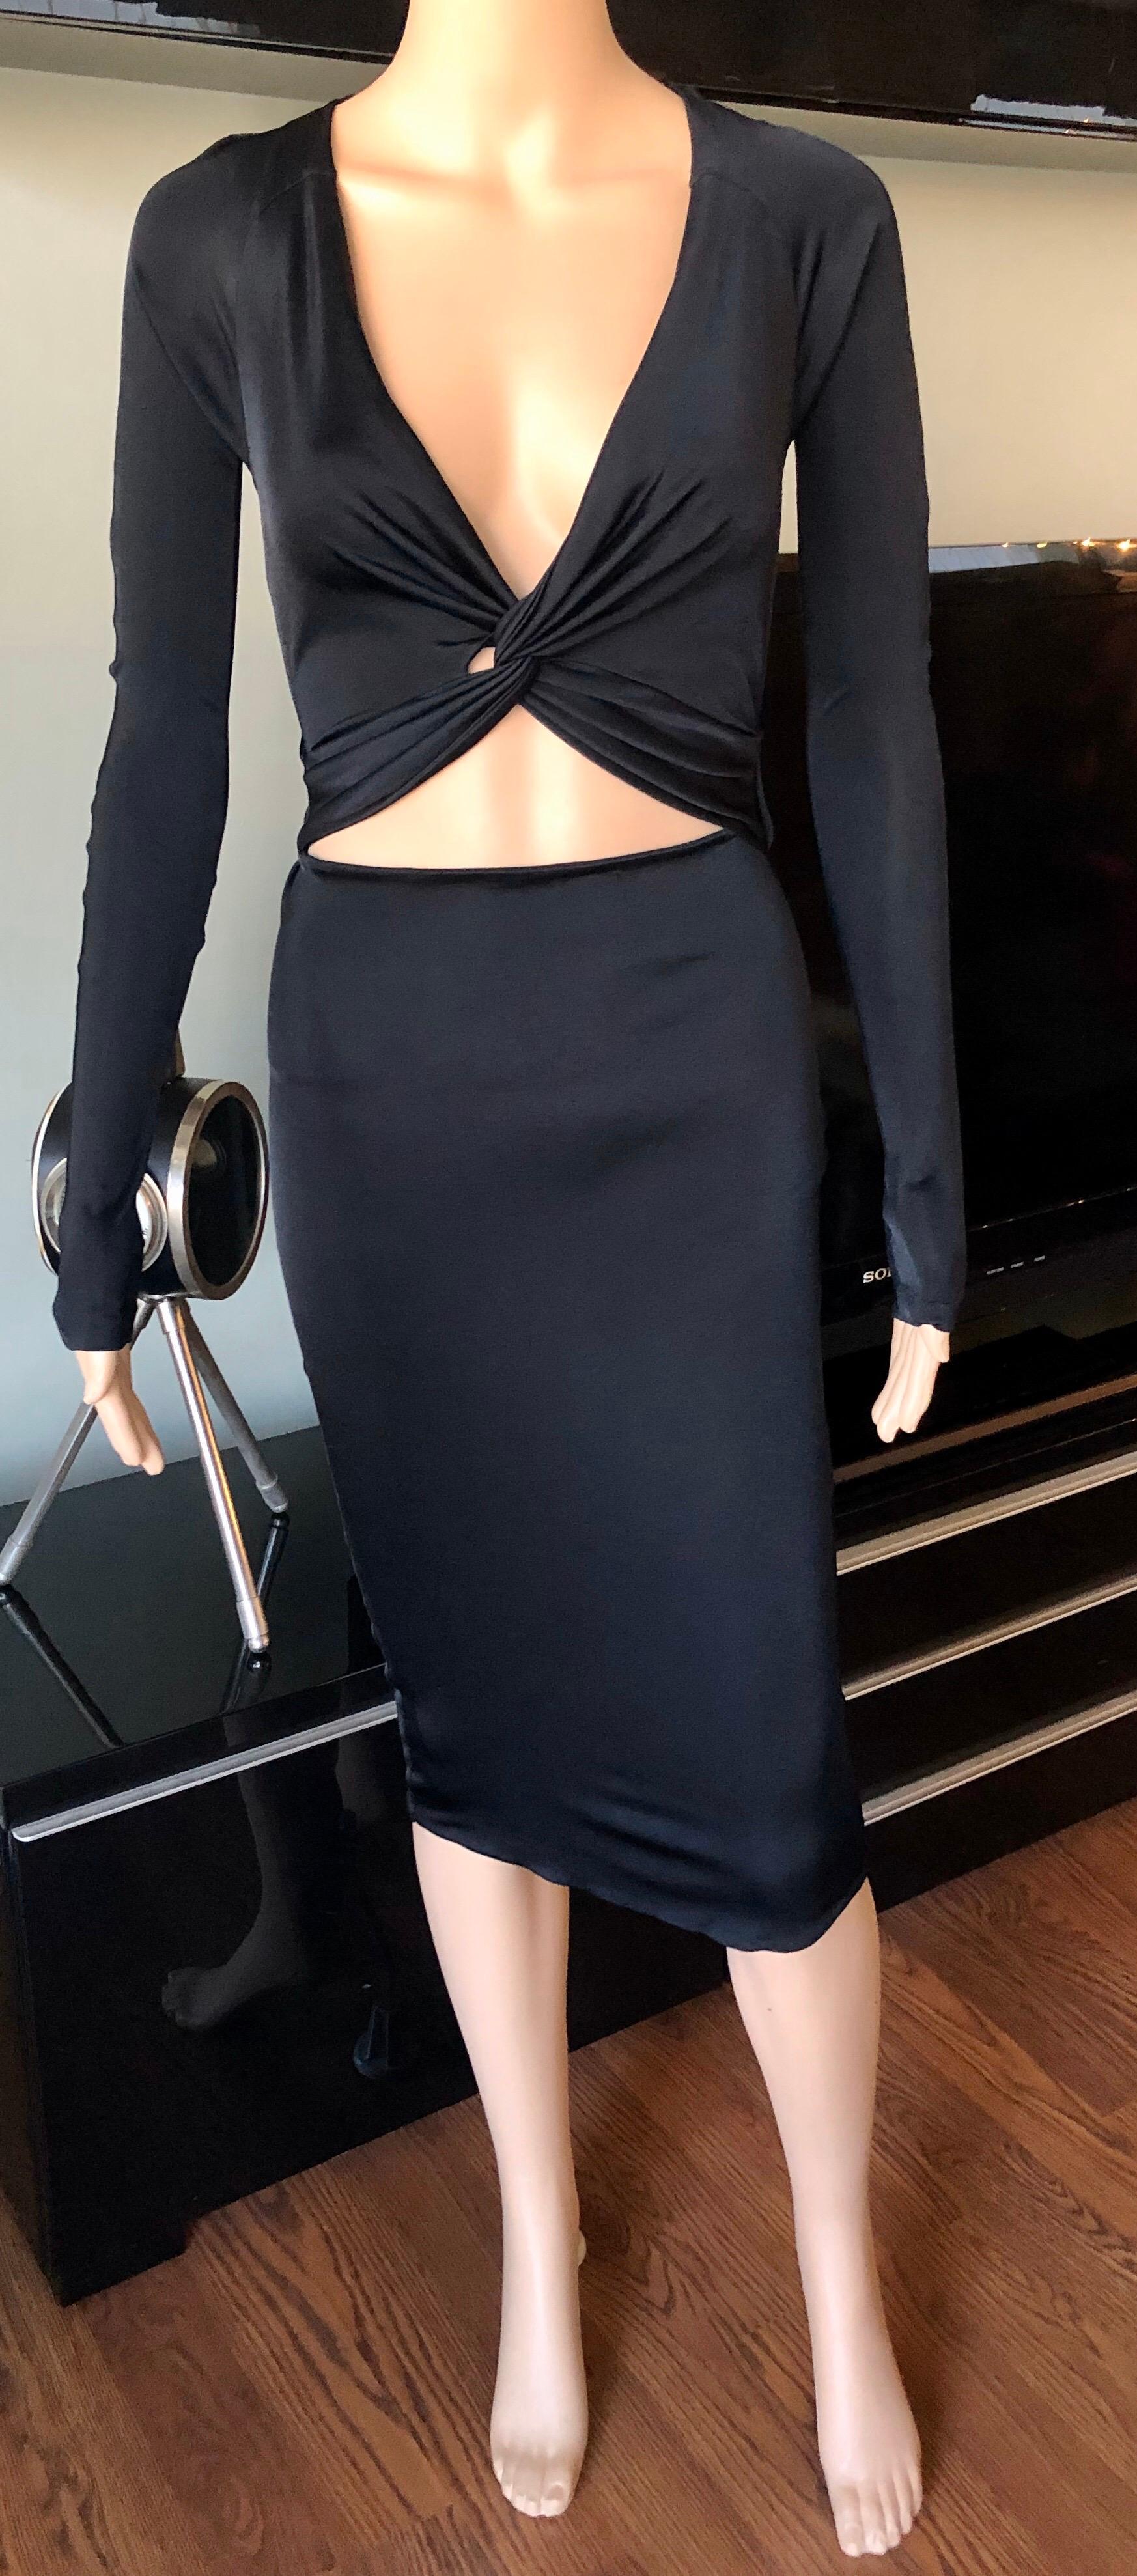 Gucci S/S 2005 Tom Ford Plunging Cutout Backless Bodycon Black Dress en vente 2